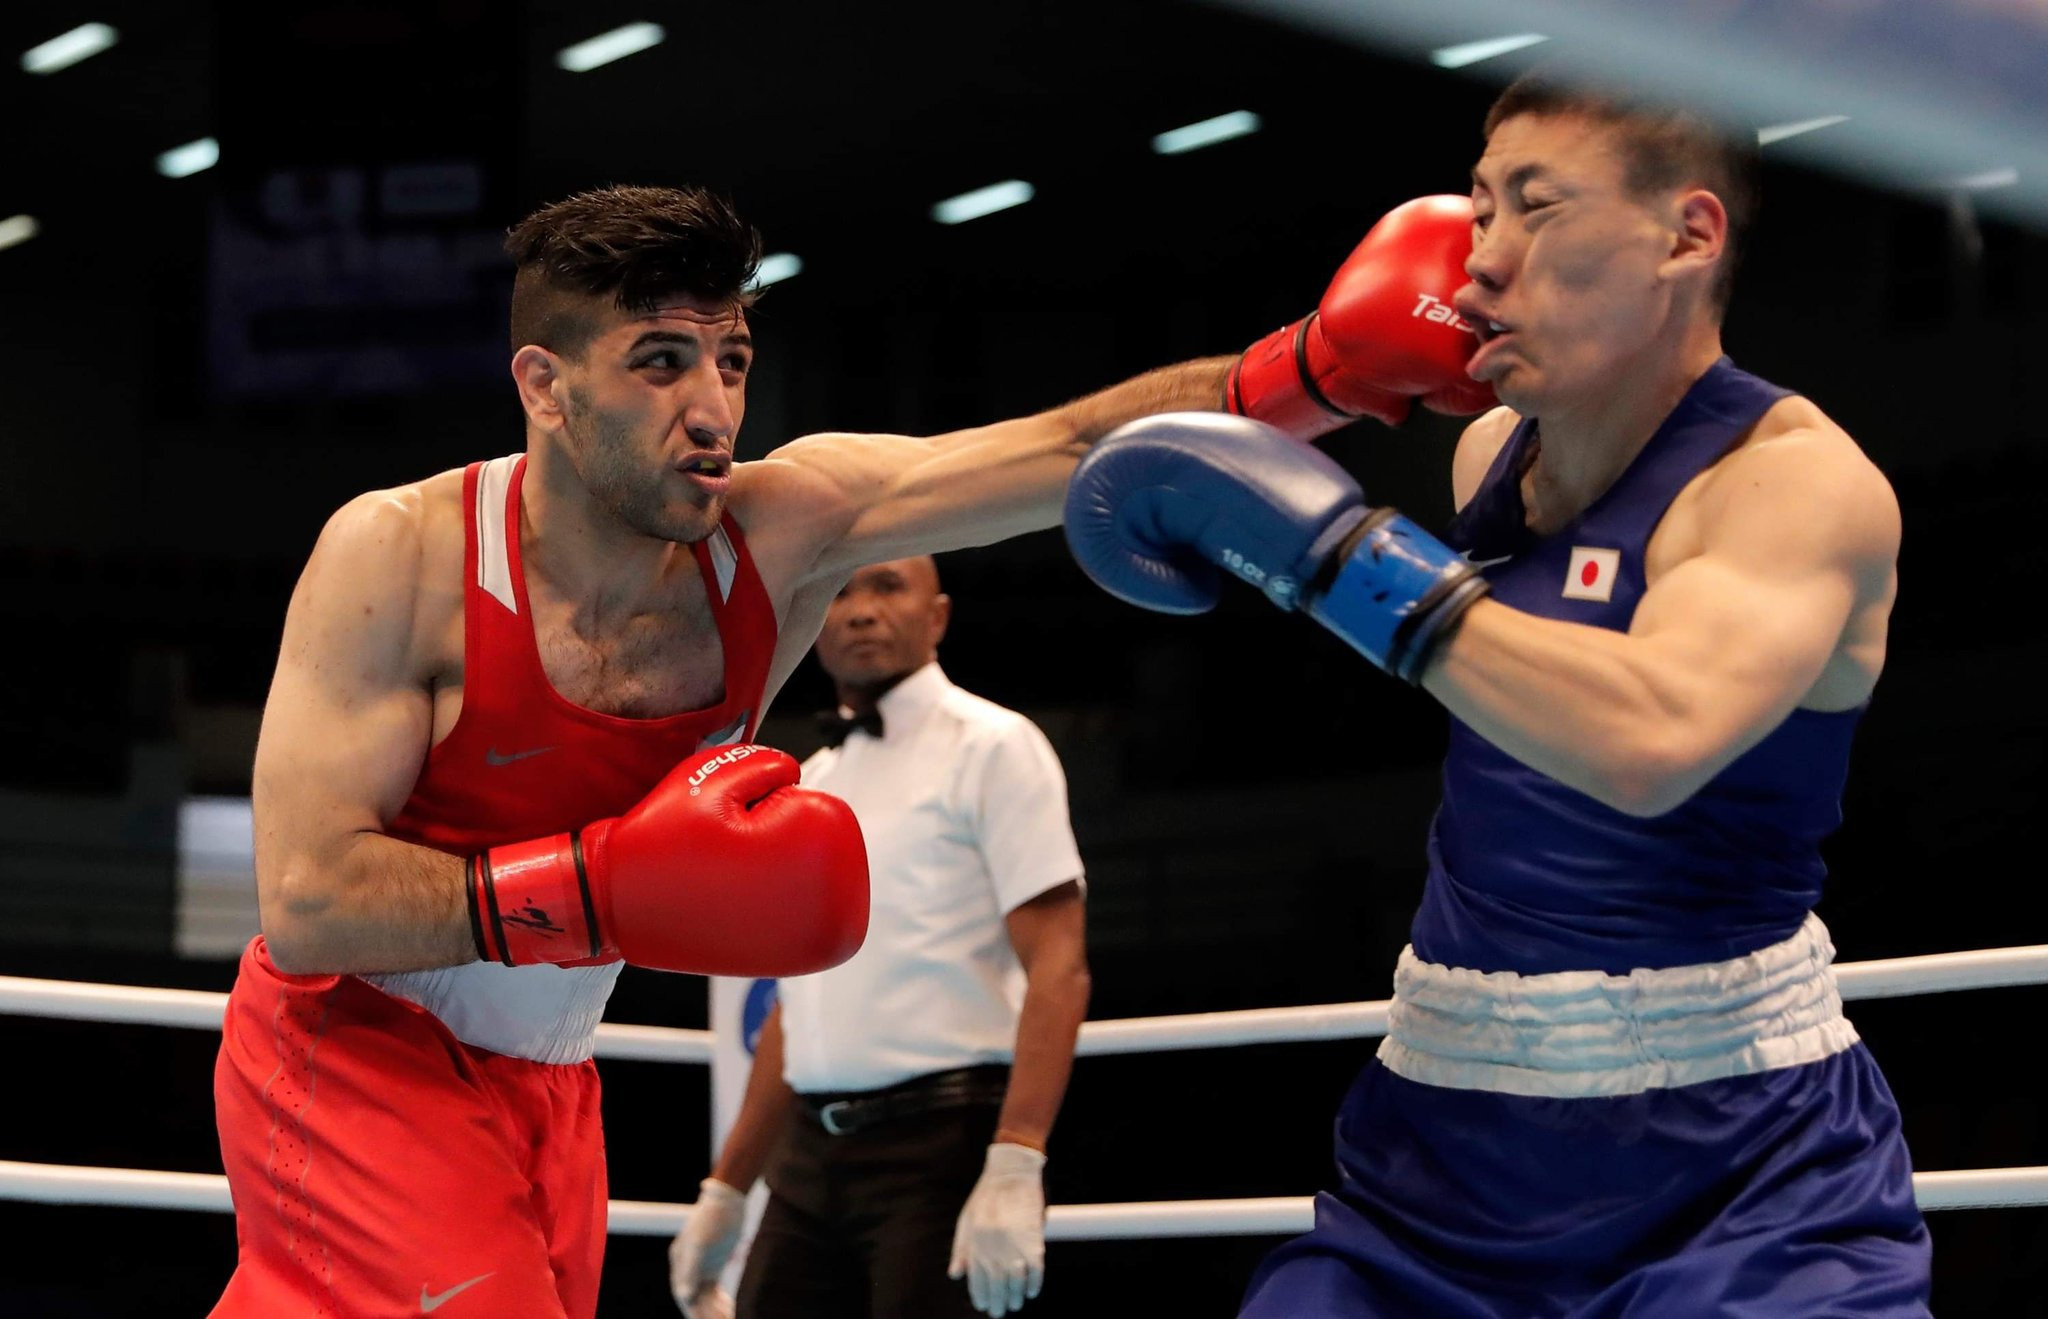 The Asia-Oceania Olympic boxing qualifier is ongoing in Amman but AIBA has no involvement ©JOC